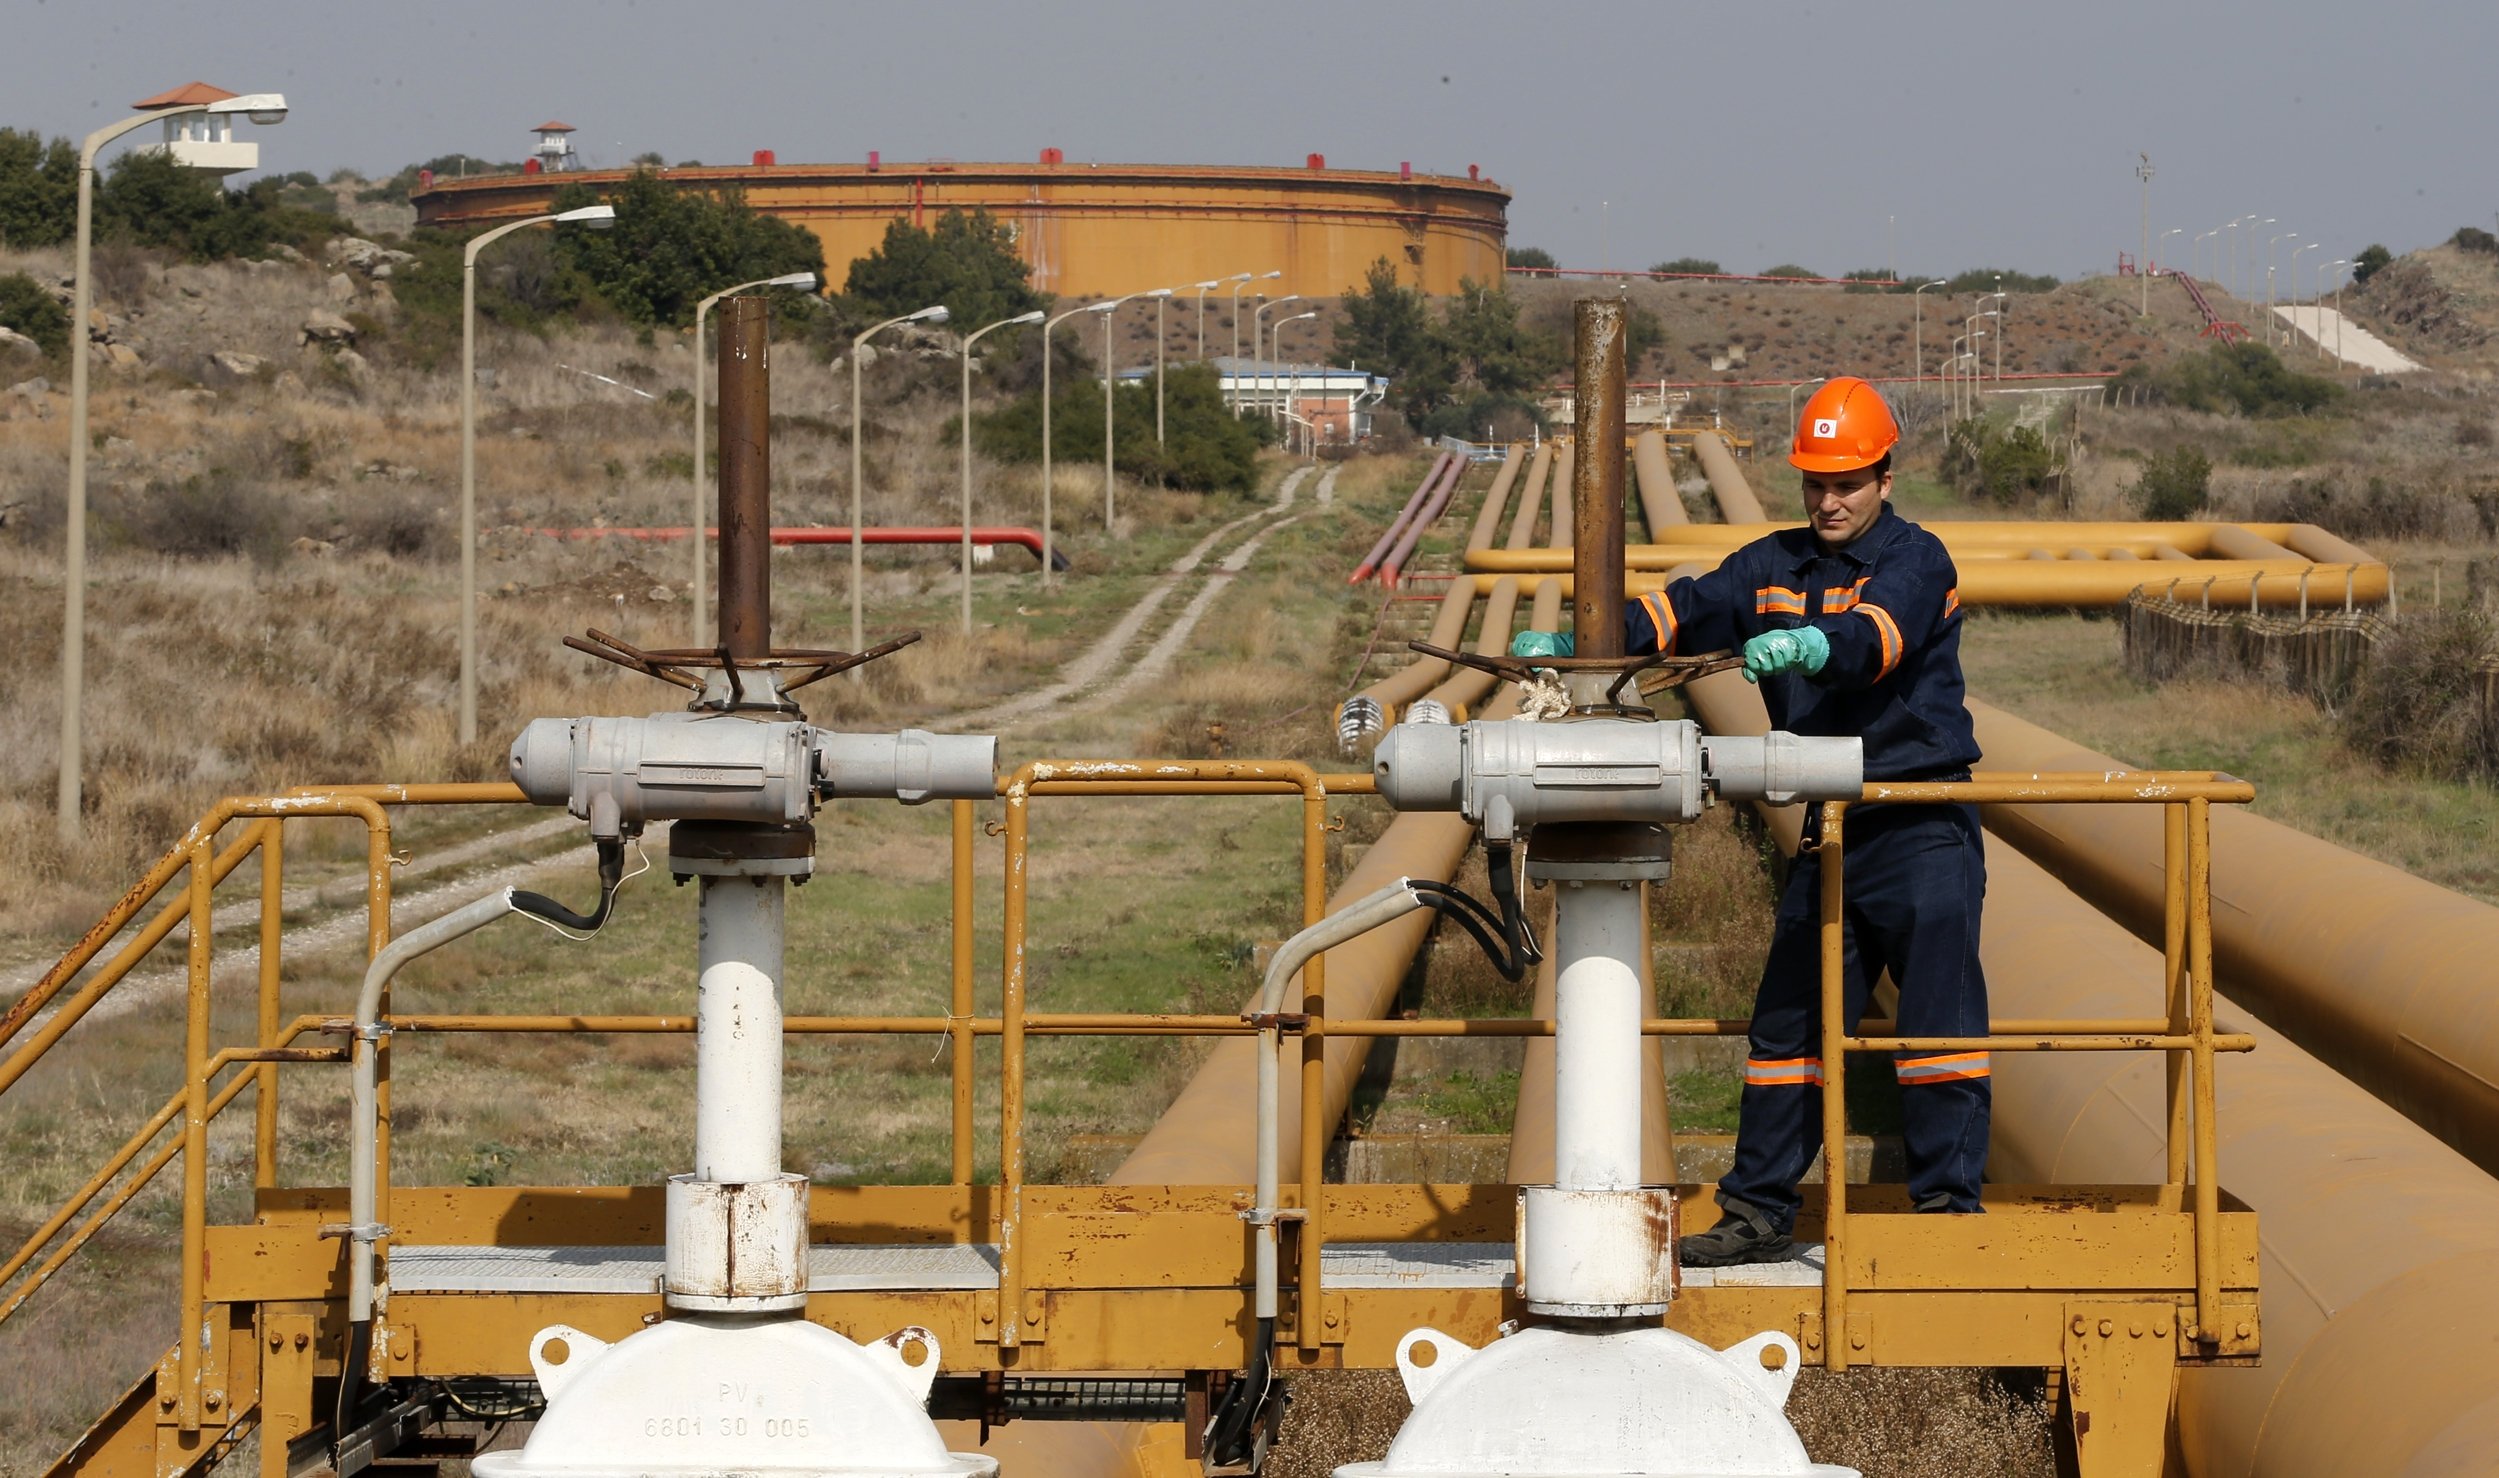 A worker checks the valve gears of pipes linked to oil tanks at the Mediterranean port of Ceyhan, which is run by the state-owned Petroleum Pipeline Corporation (BOTAS), some 70 kilometers (43.5 miles) from Adana, Türkiye, Feb. 19, 2014. (Reuters File Photo)